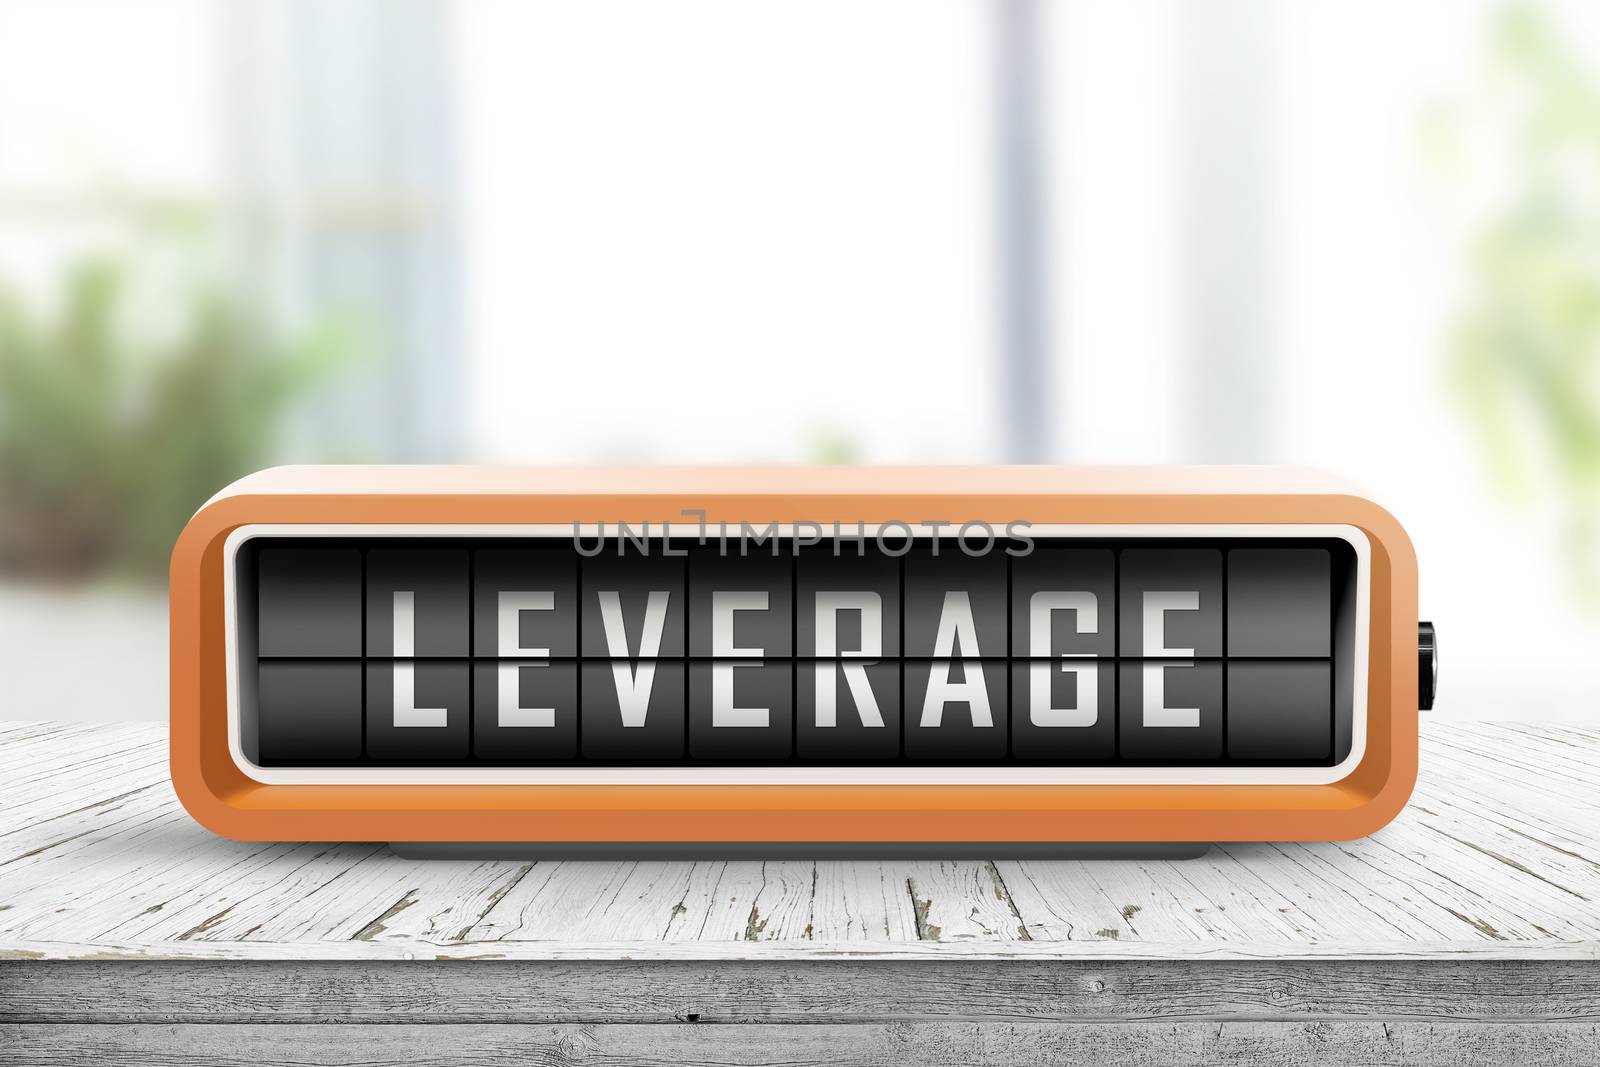 Leverage message on an analog device by Sportactive